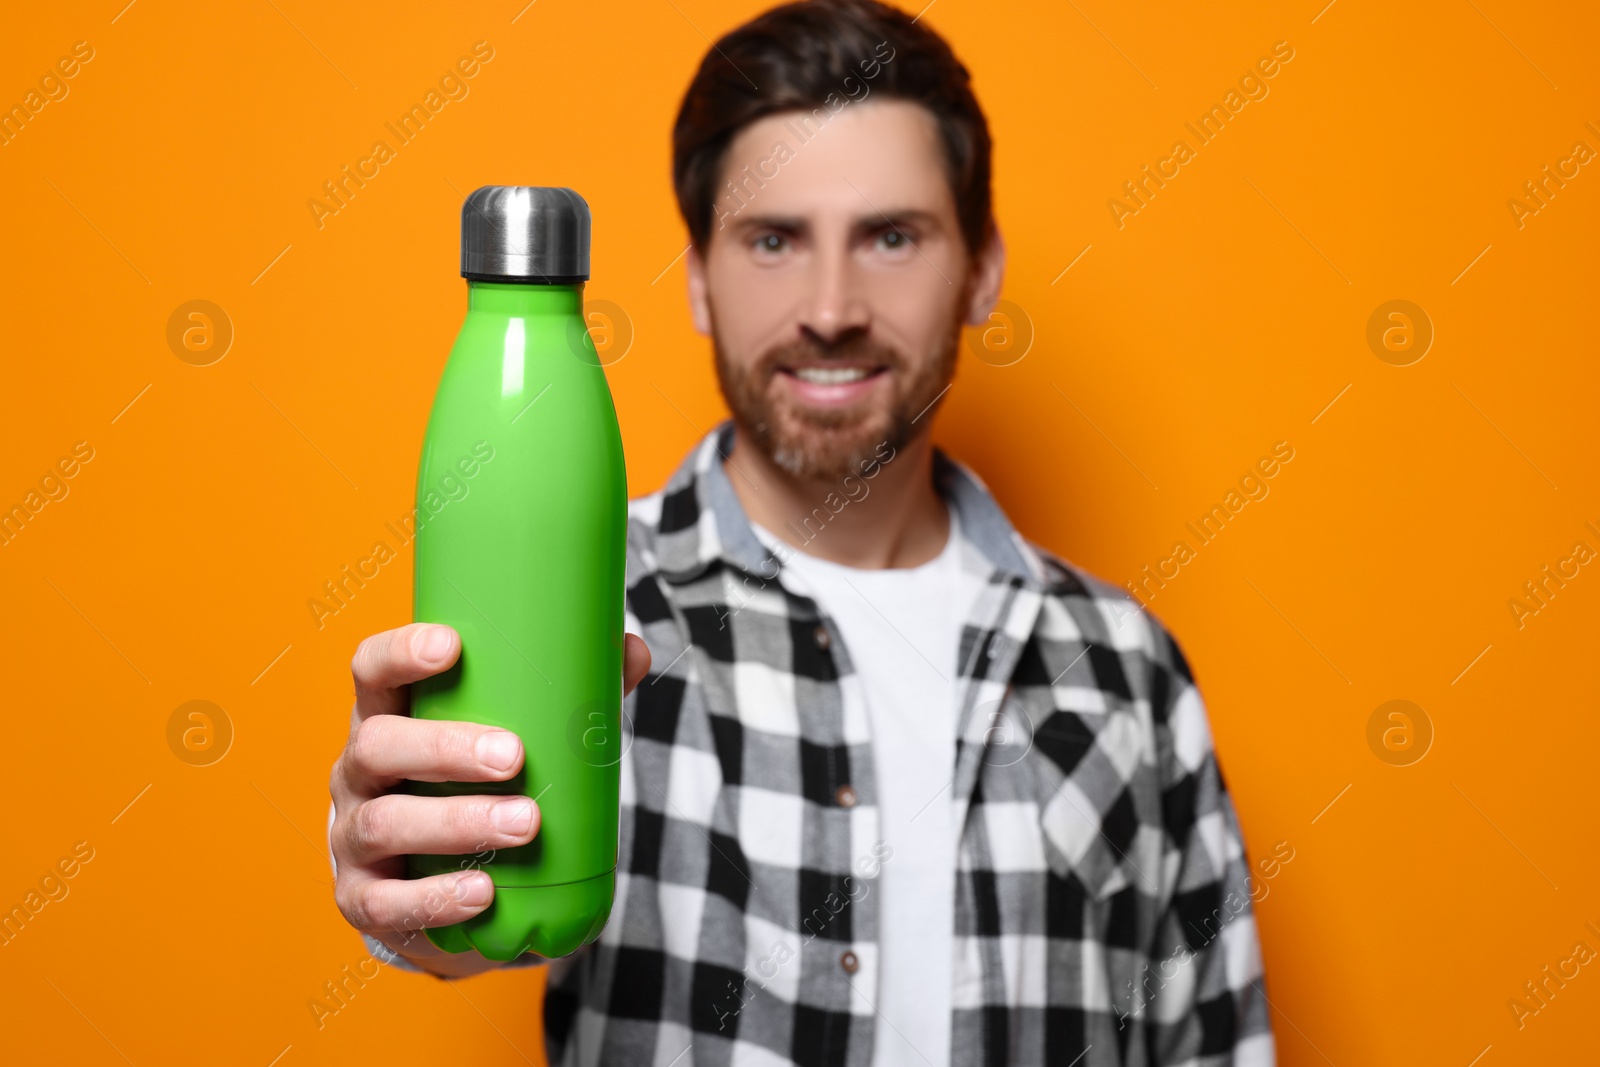 Photo of Man with green thermo bottle against orange background. Focus on hand